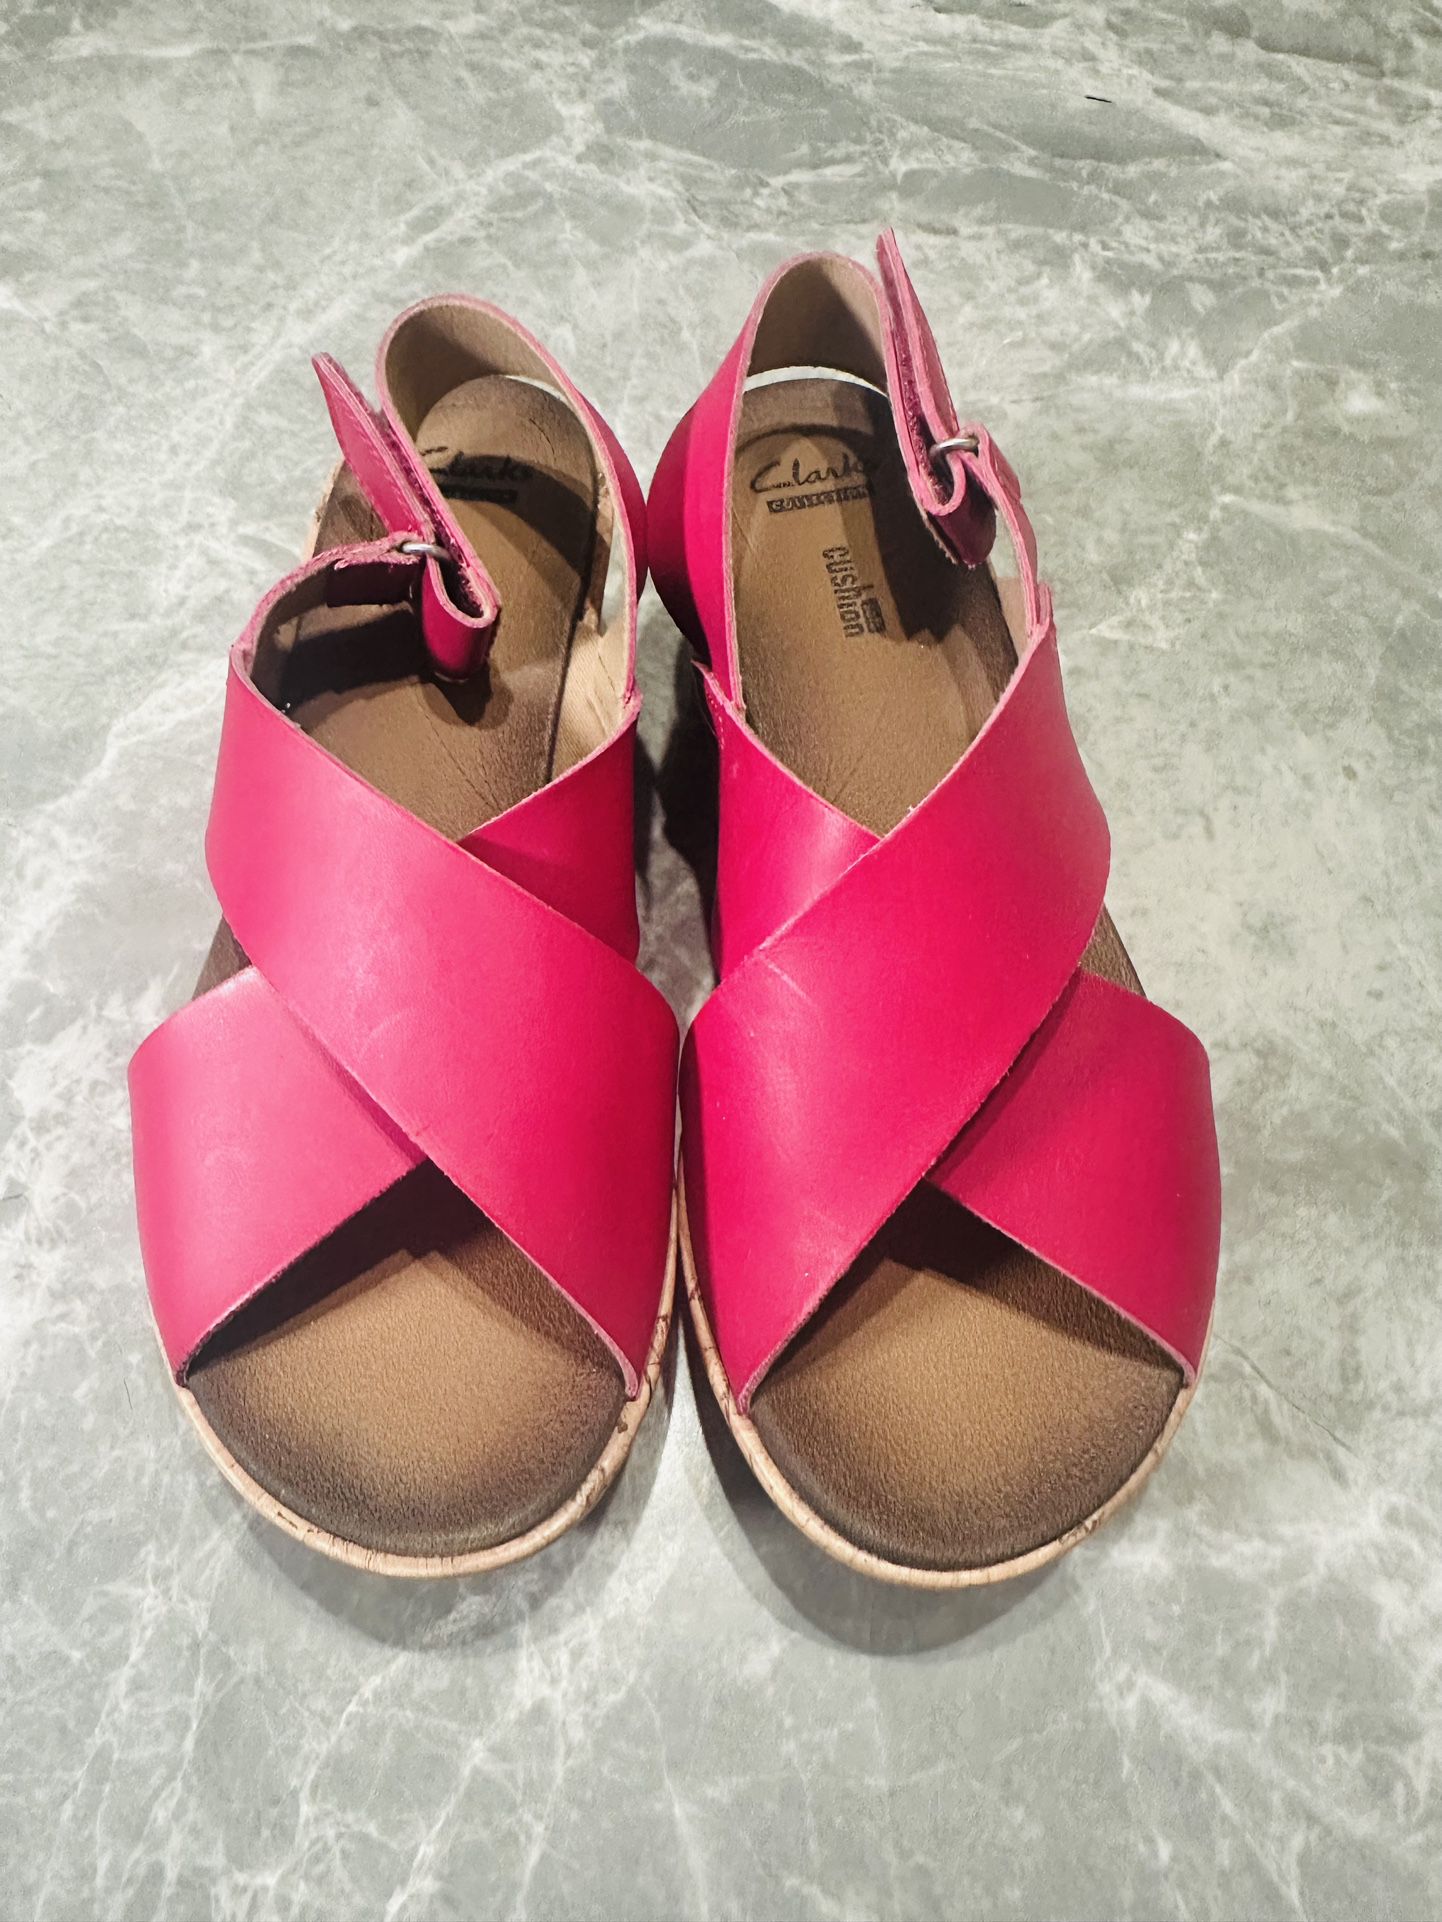 CLARKS Collection SZ 7 Soft Cushion Wedge Sandals Pink Shoes